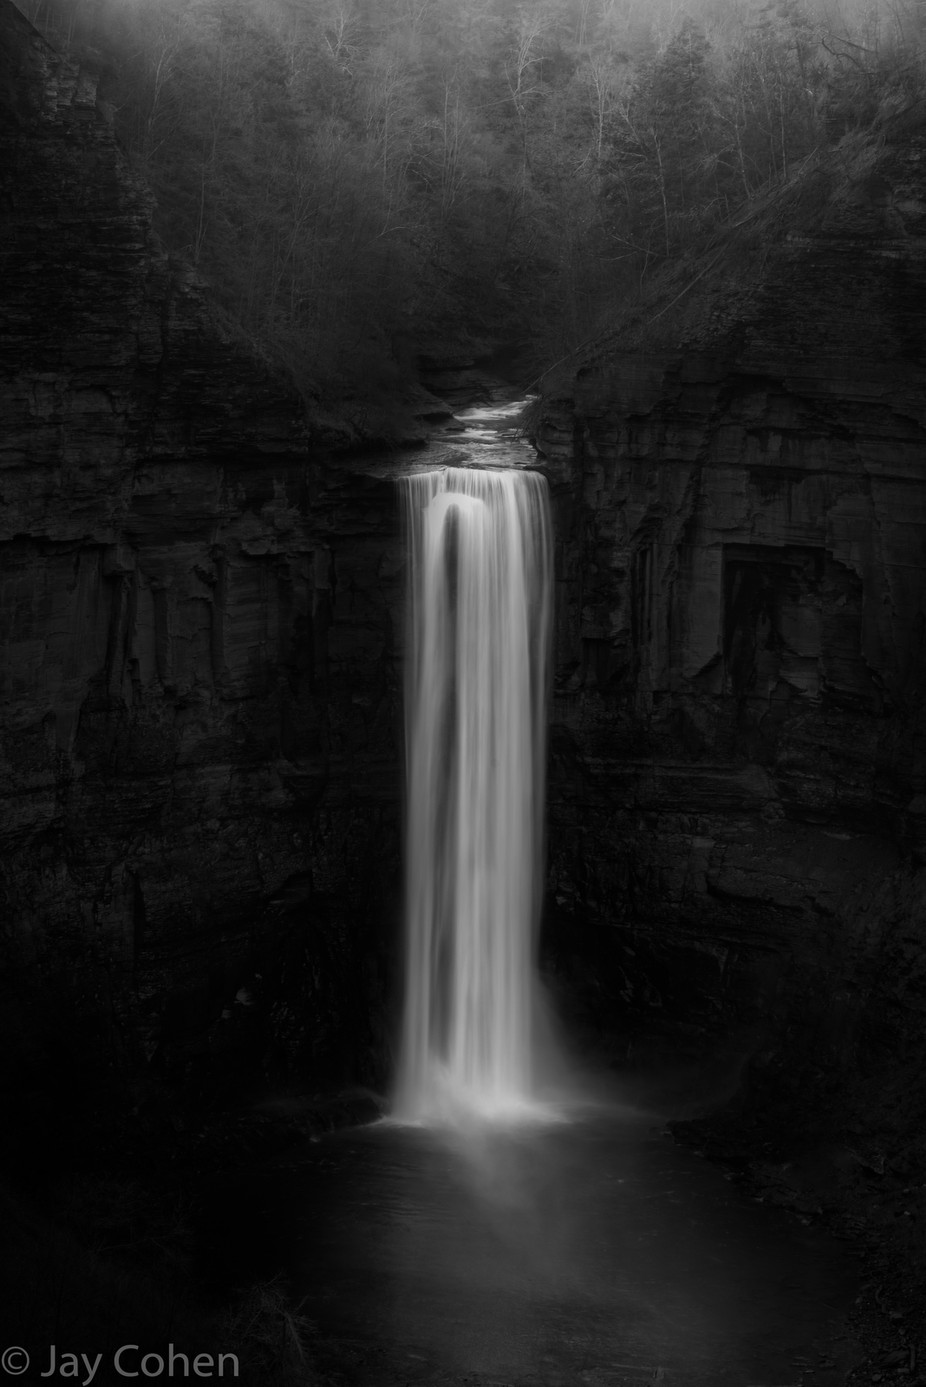 Falling by jaycohen - The Water In Black And White Photo Contest